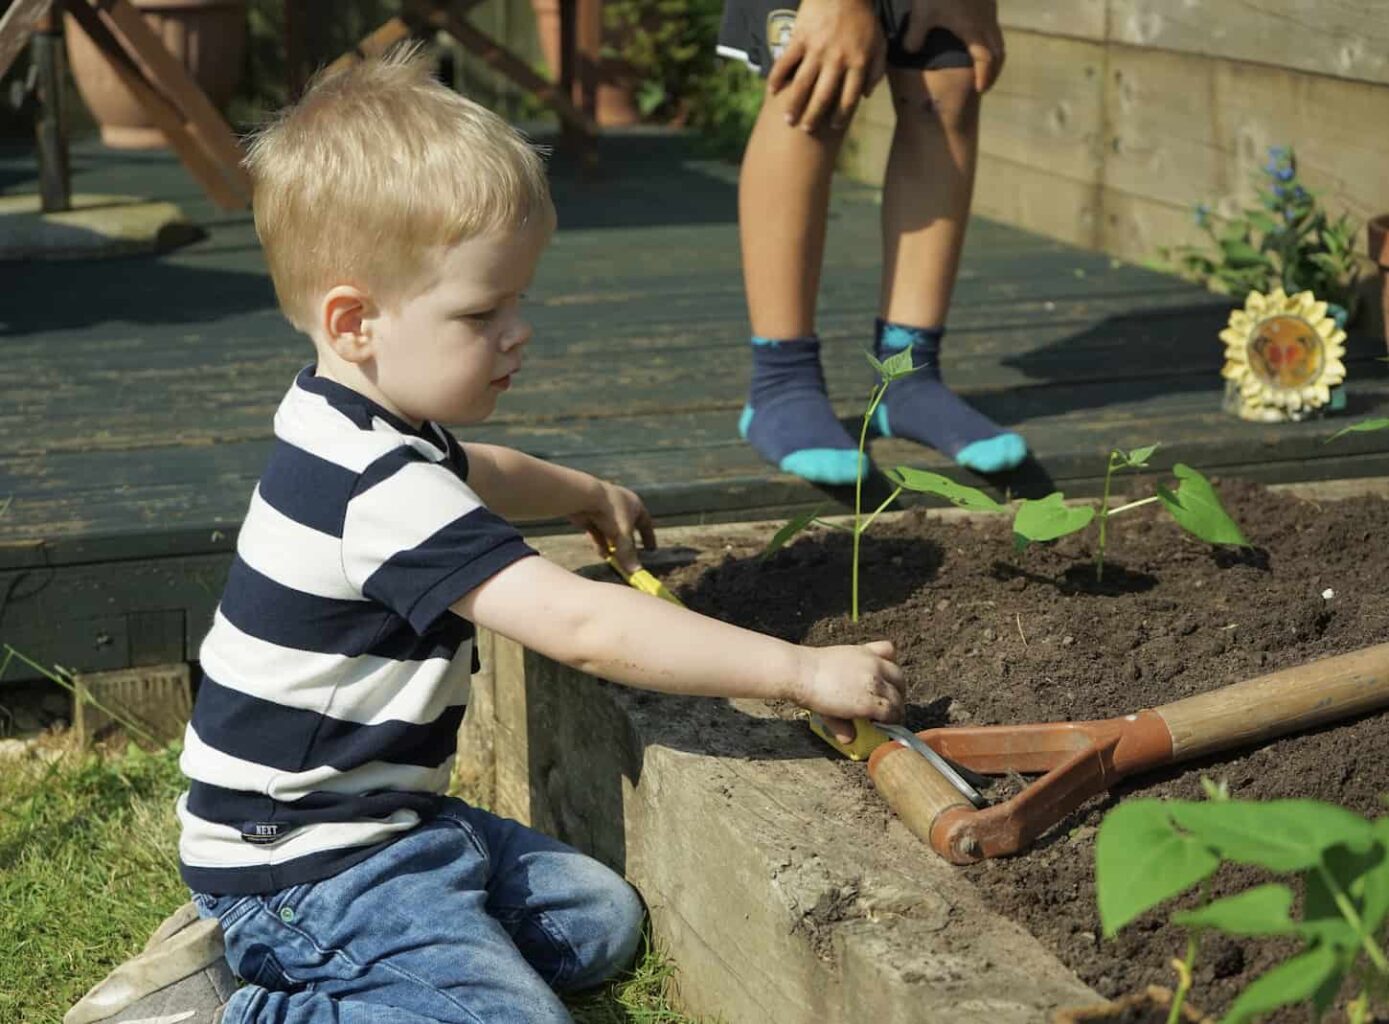 An image of two young boys planting runner beans in a raised bed made in stone.